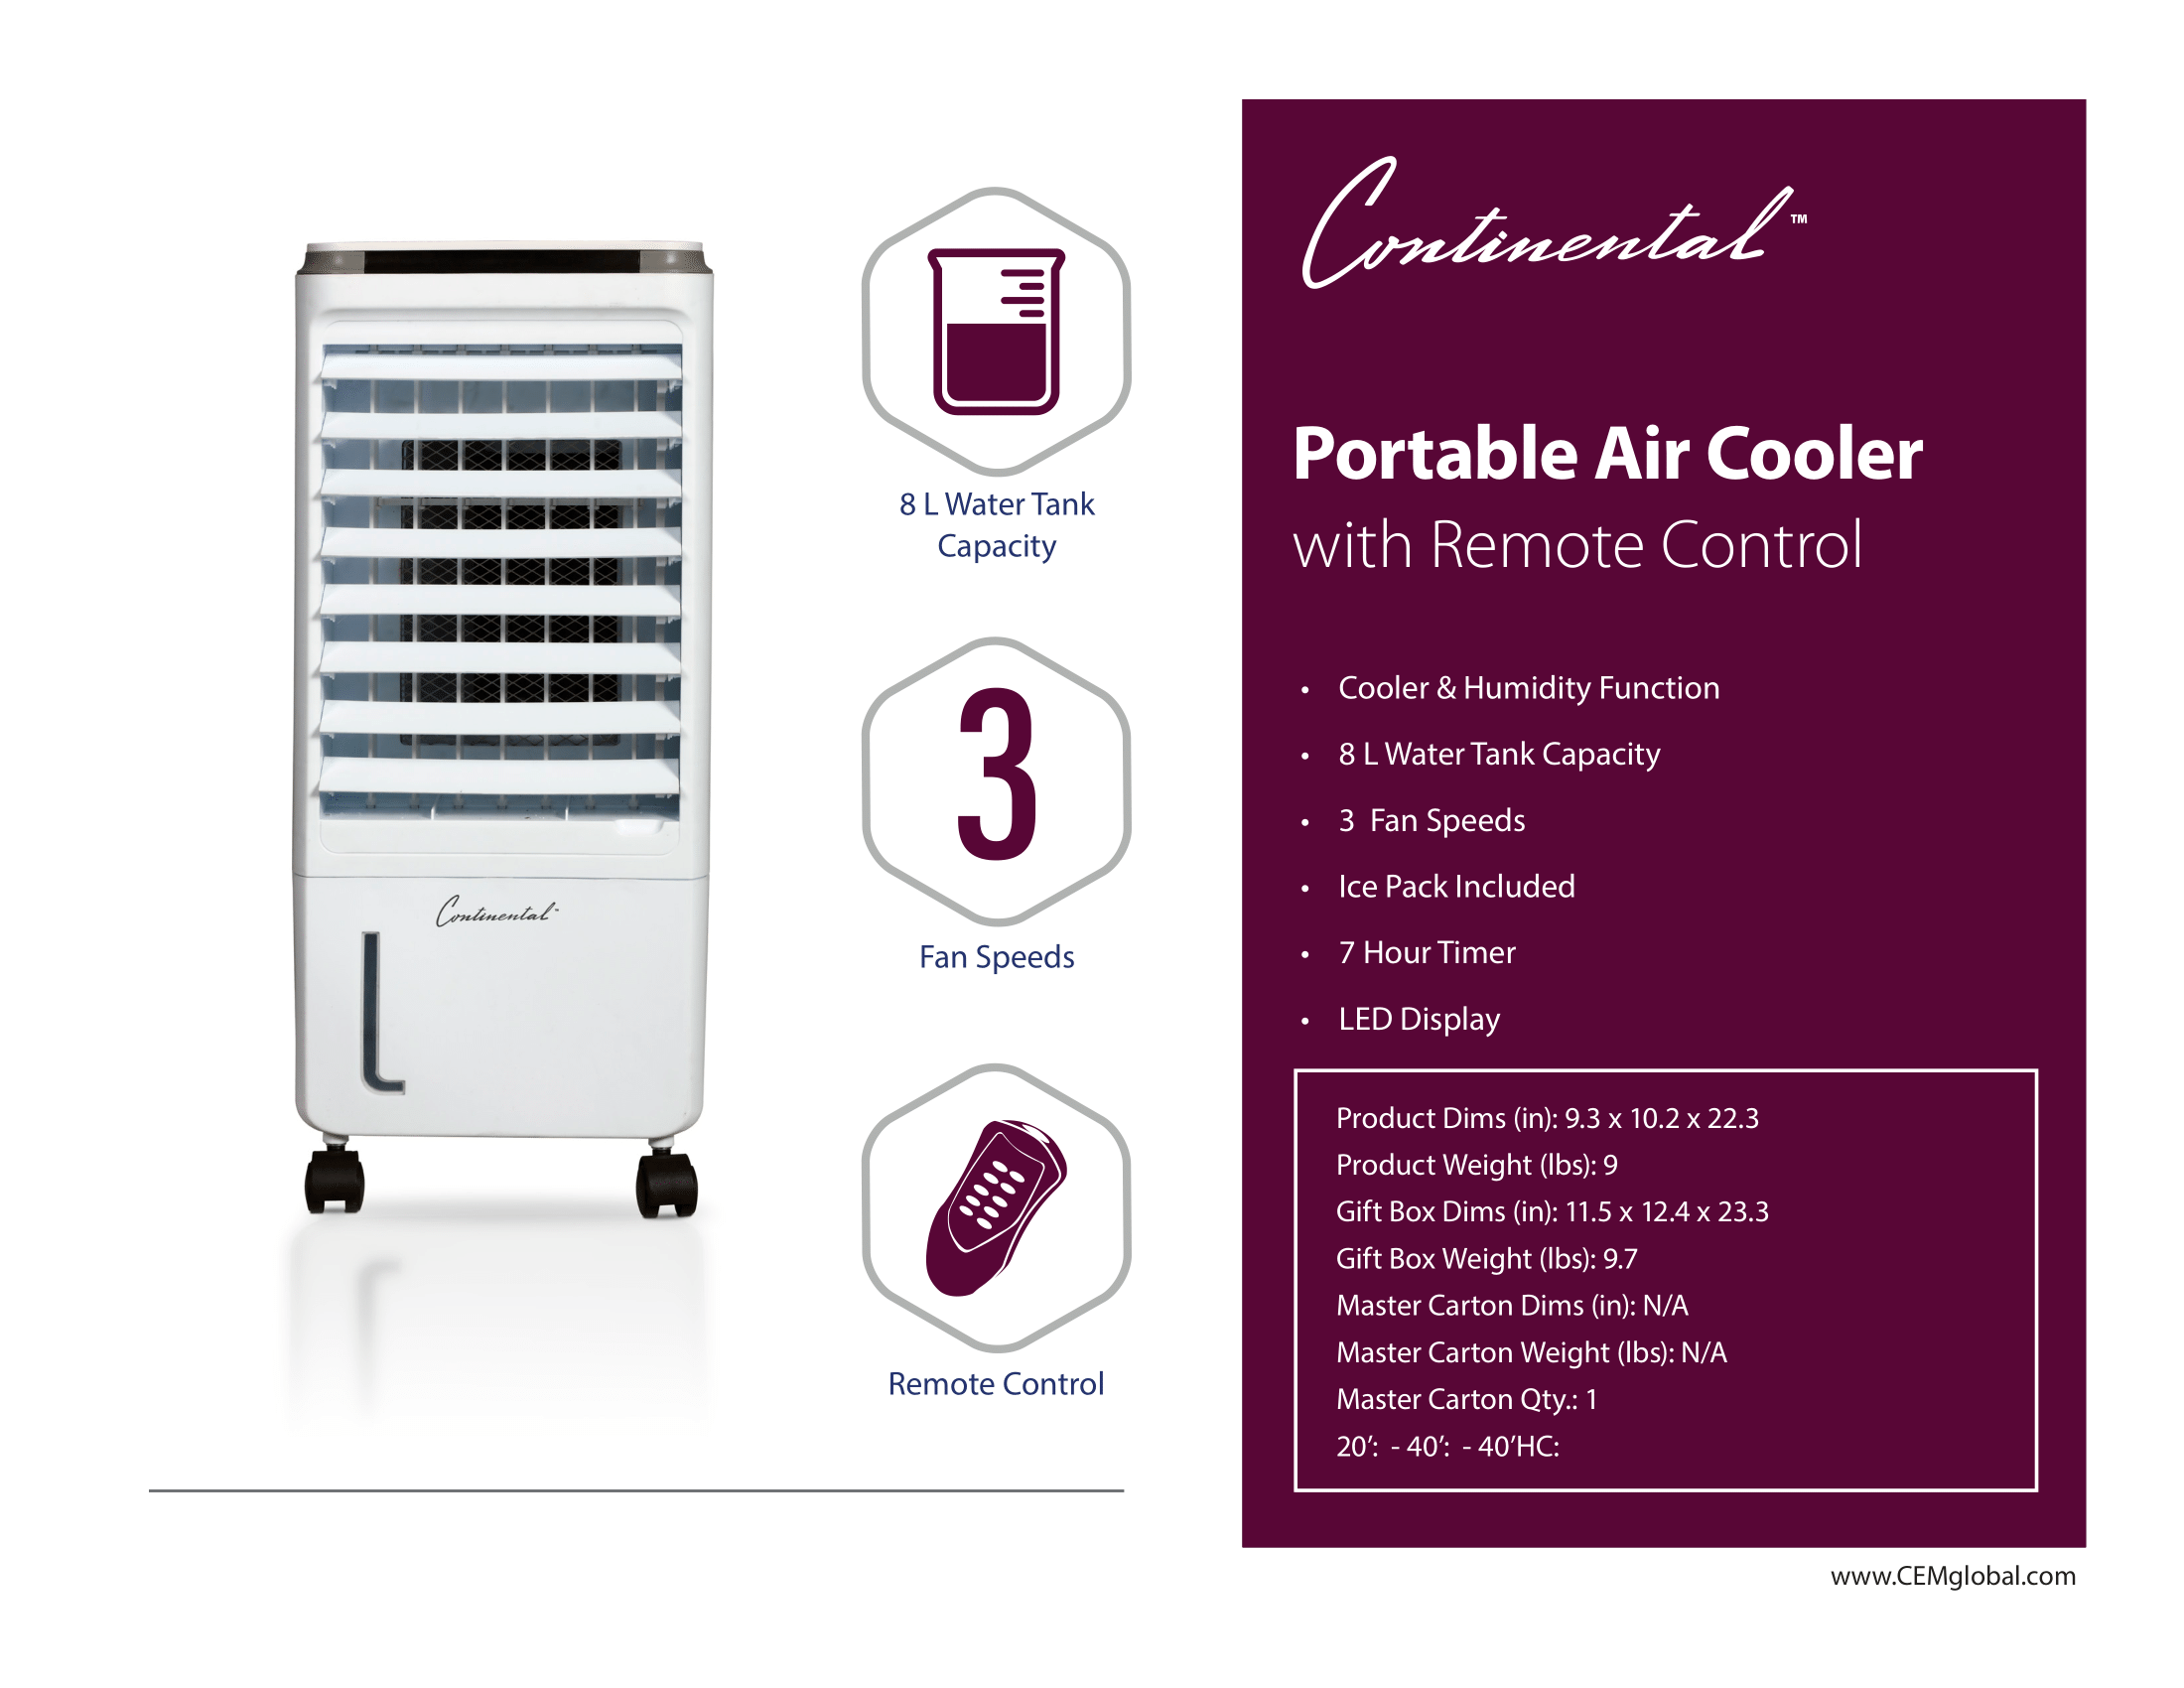 Portable Air Cooler with Remote Control